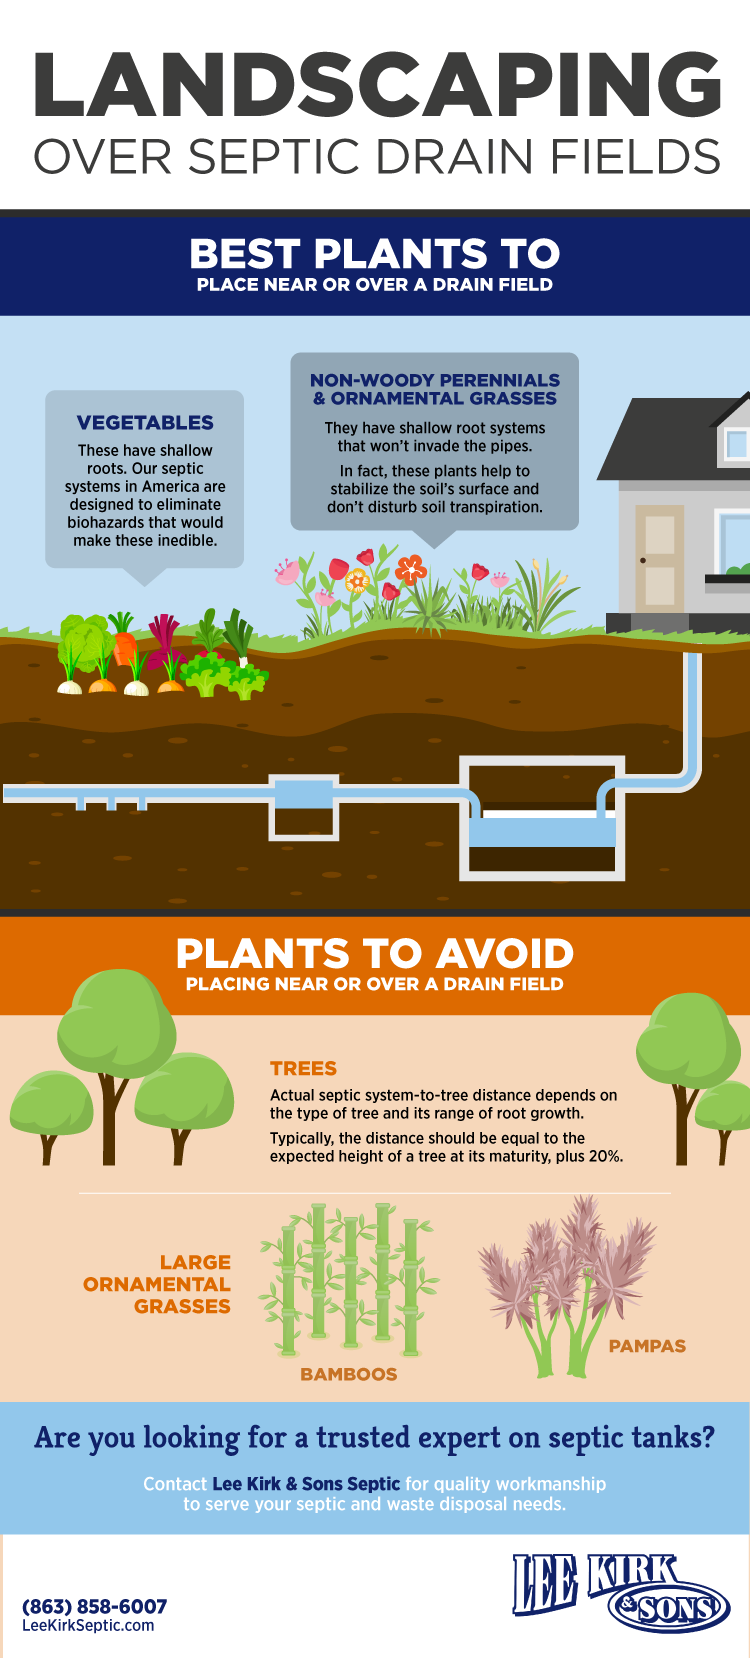 Perfect Plants to Place Over a Septic Drain Field